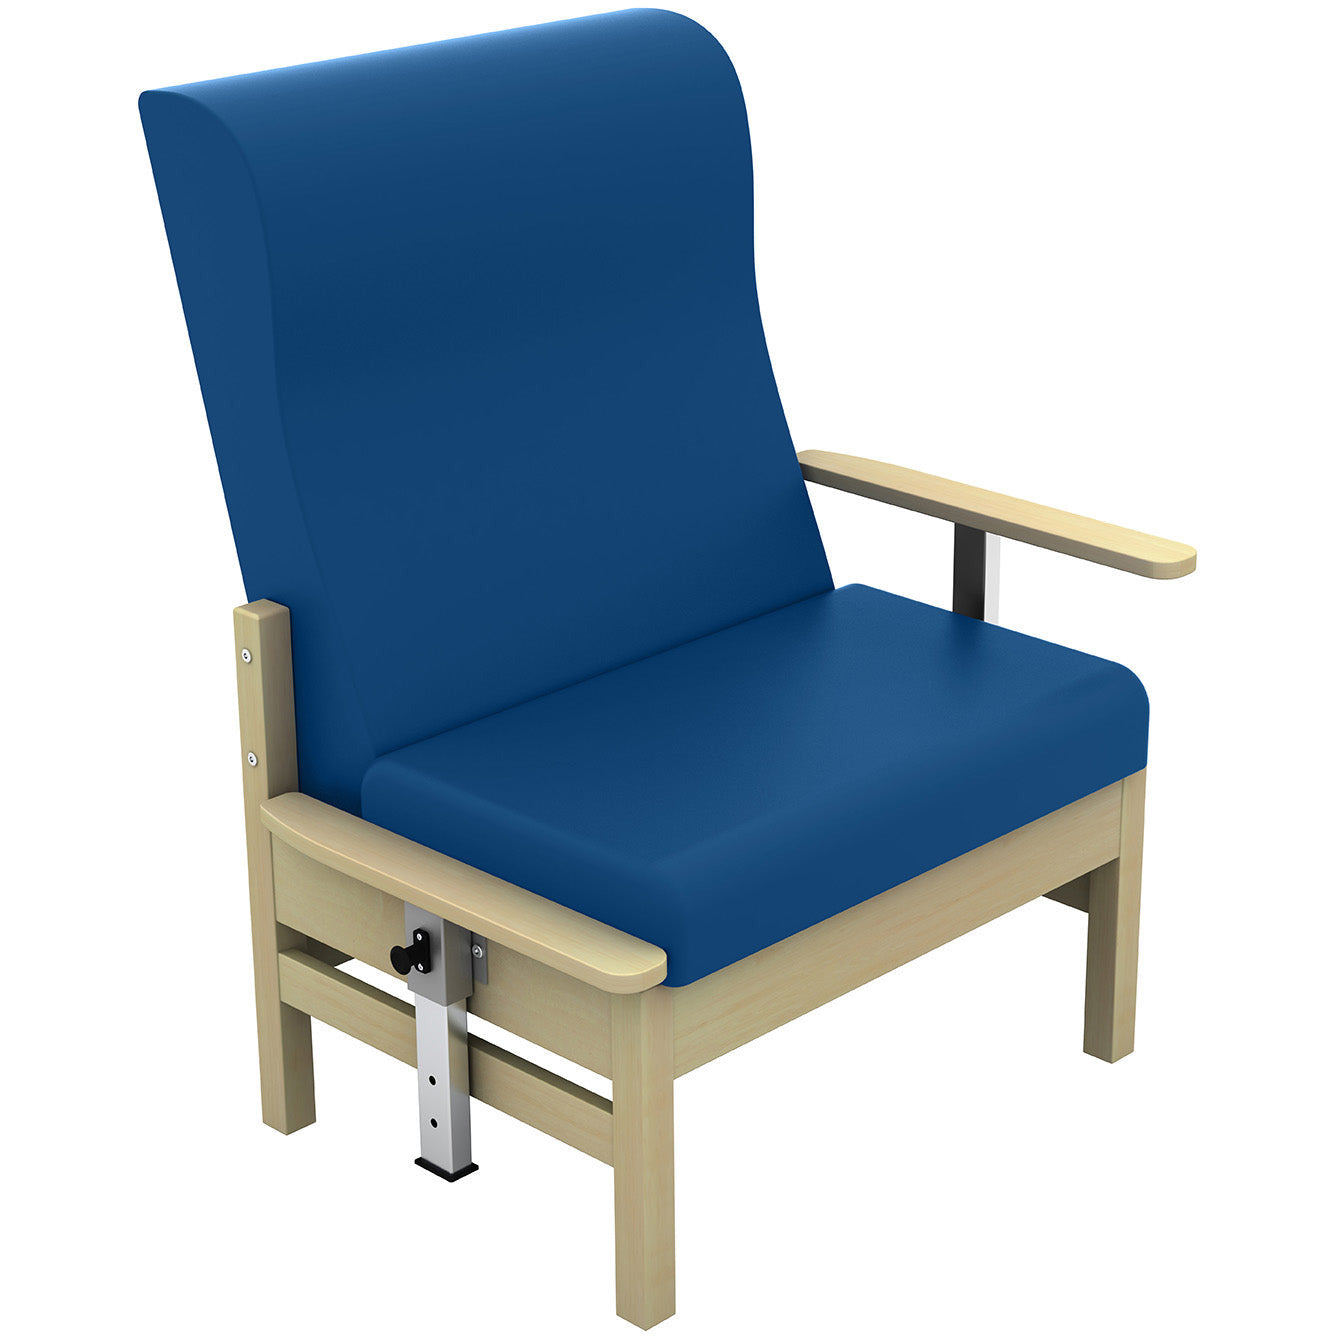 Sunflower Atlas Bariatric Patient Chair with Drop Arms - Vinyl Upholstery